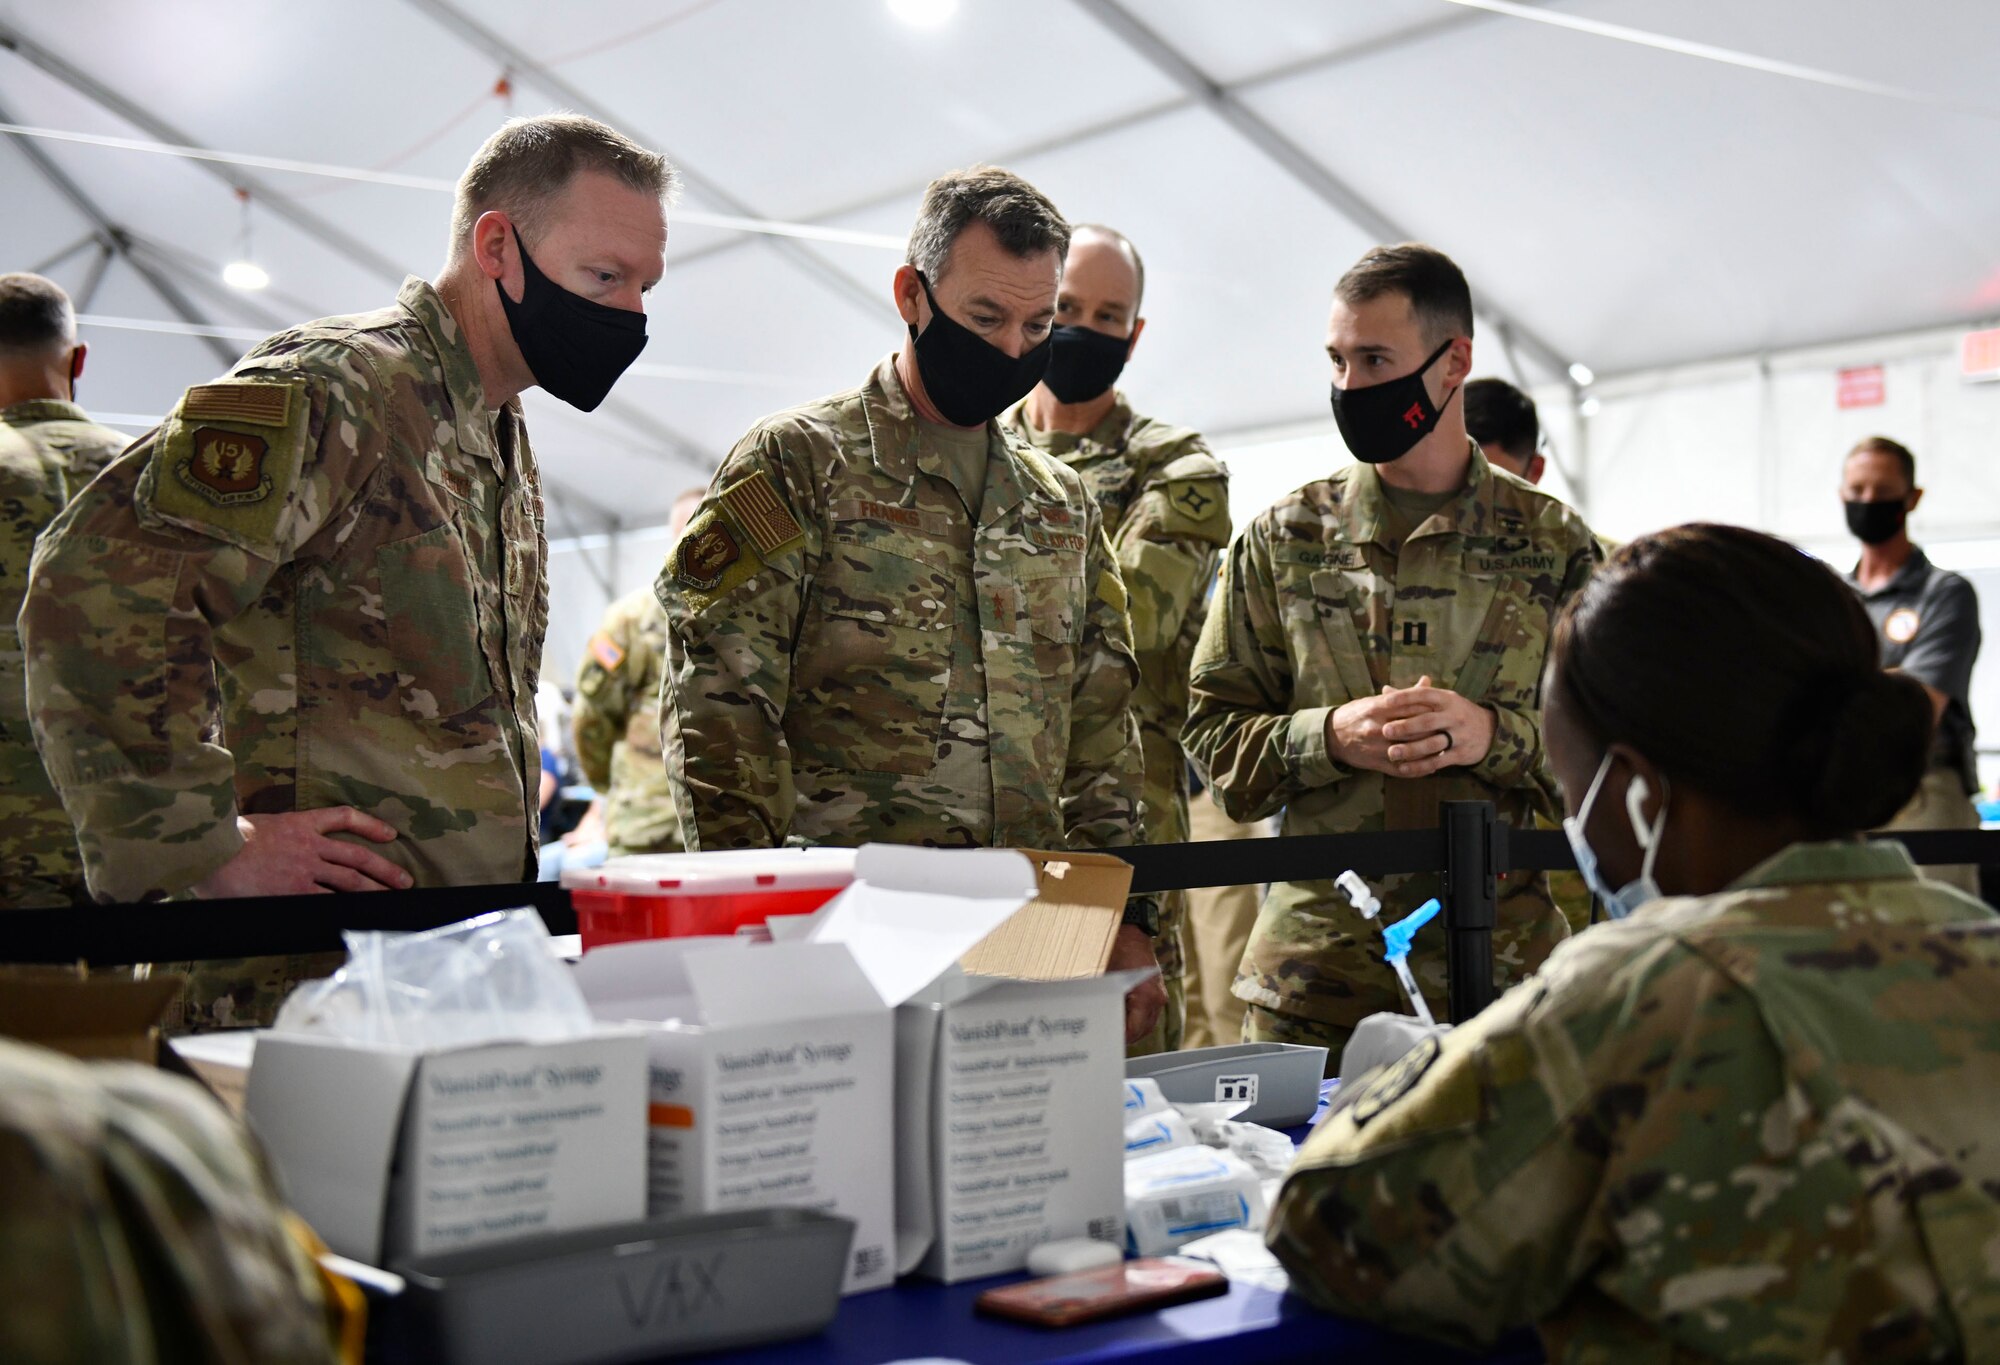 15th Air Force Commander and Command Chief visit Orlando Community Vaccination Center